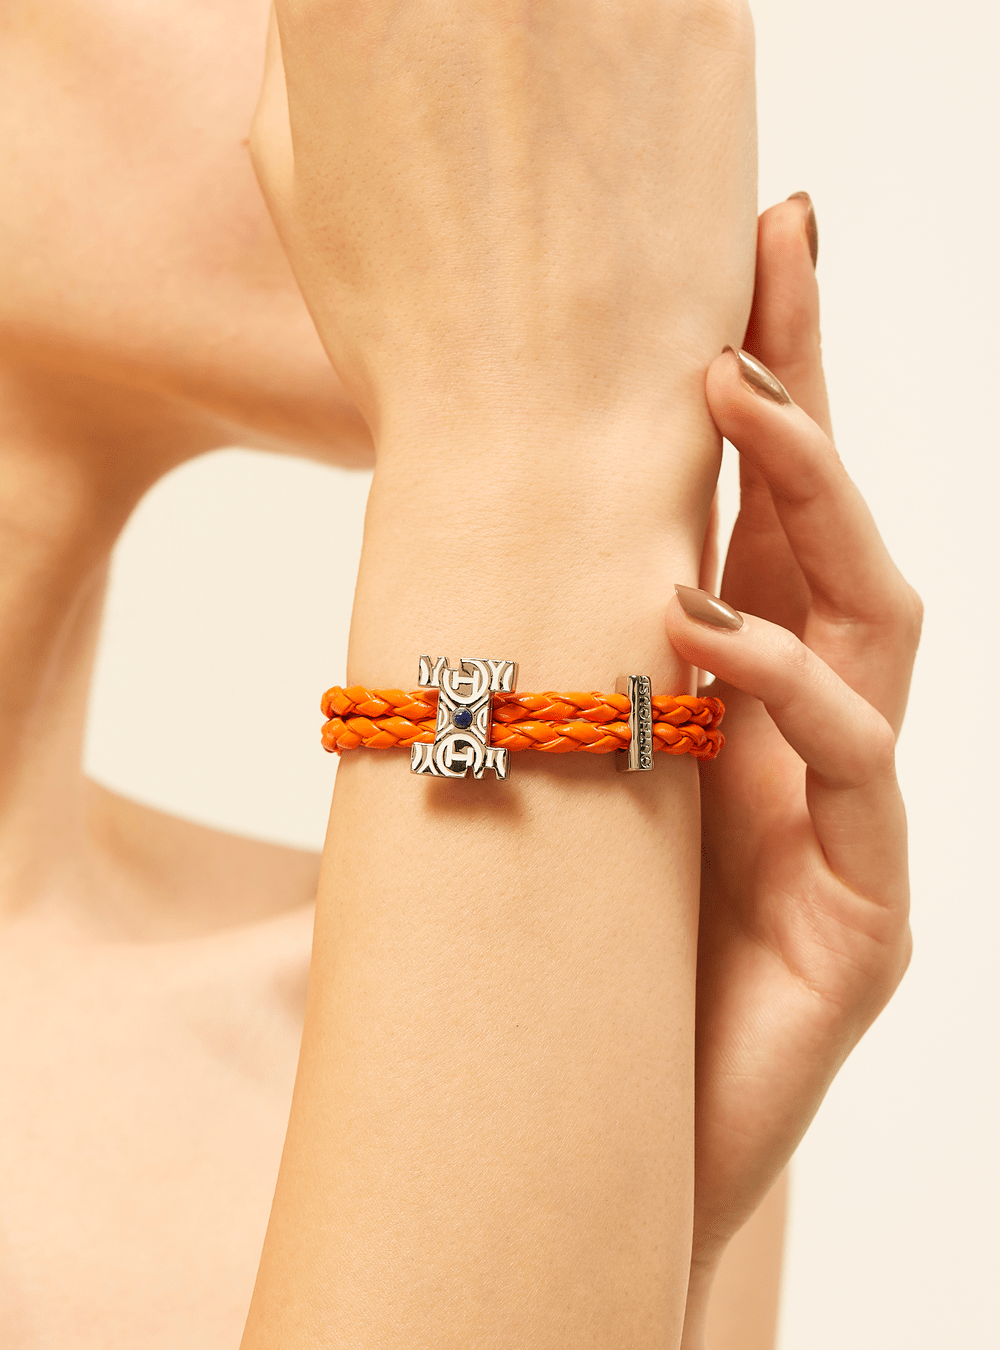 Bond Touch Bracelet - Feel their touch no matter the distance